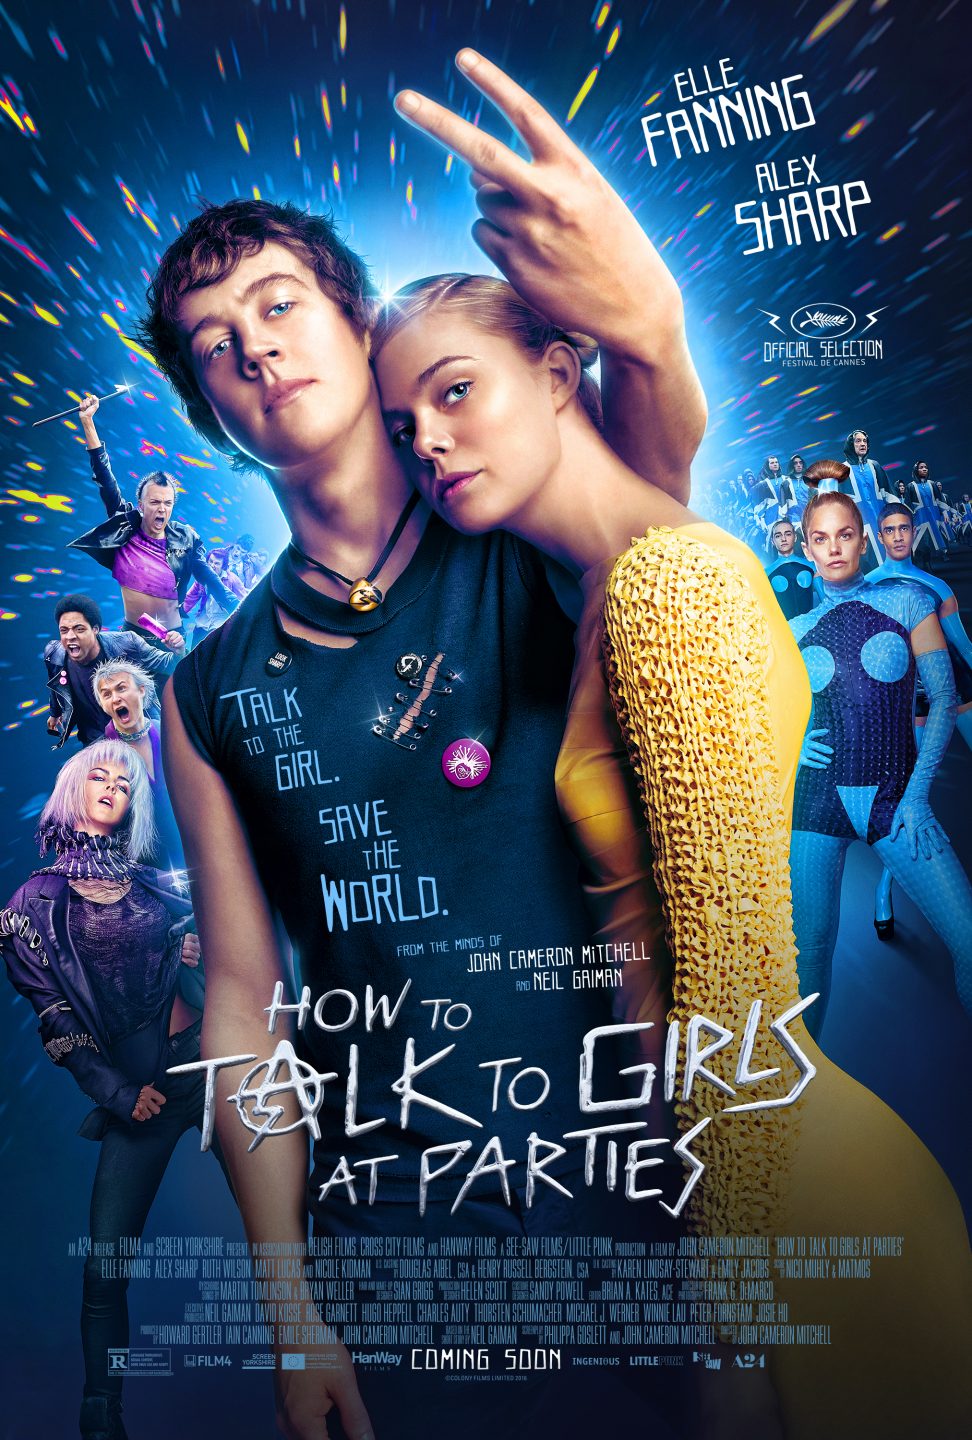 How To Talk To Girls At Parties poster (A24 Films)